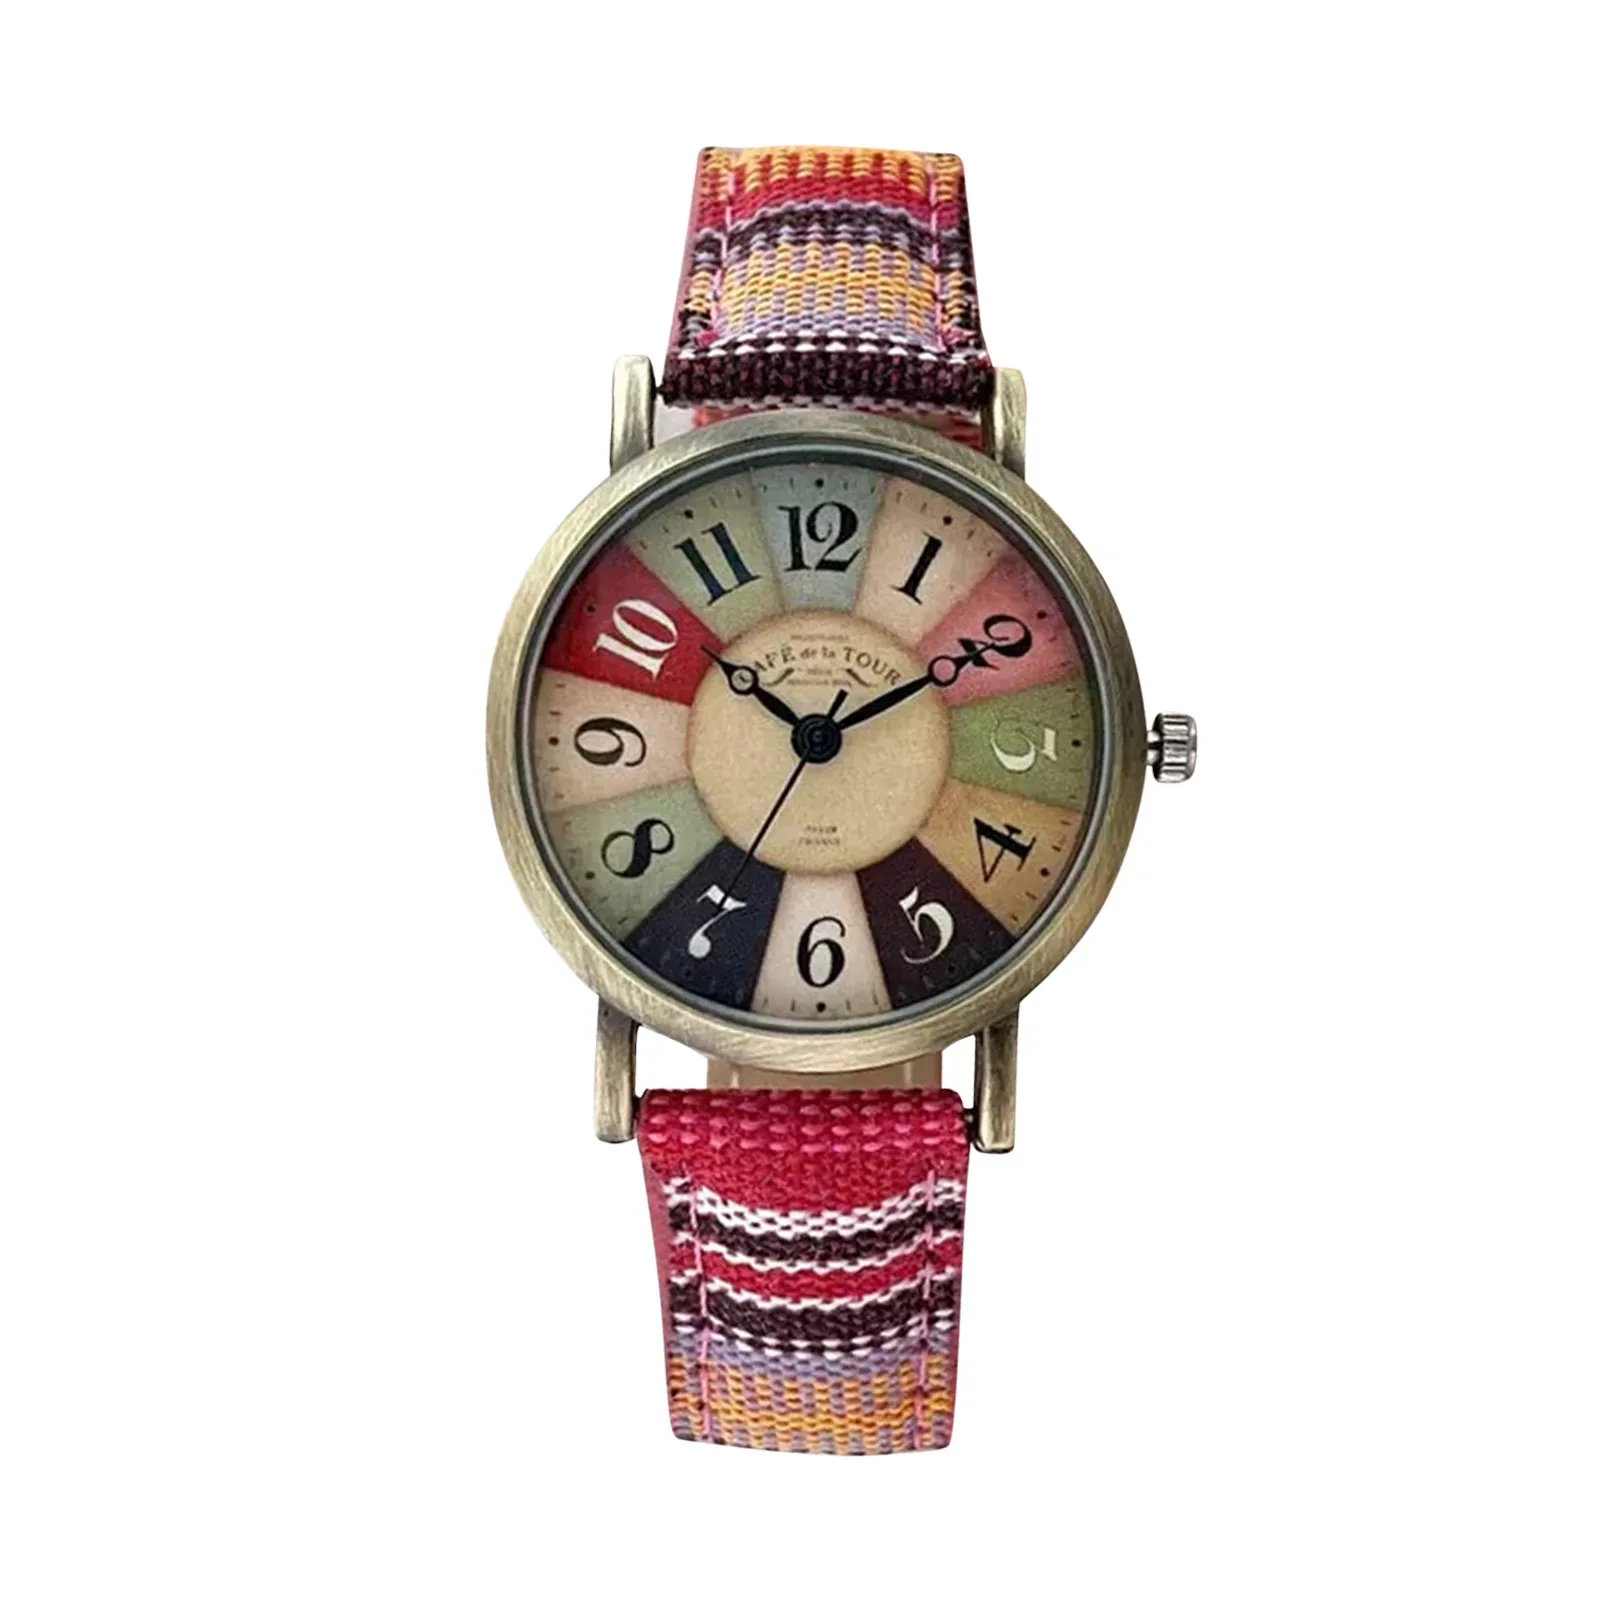 New fashion women's watch with multi-color rainbow pattern men's hand strap watch for women enlarge